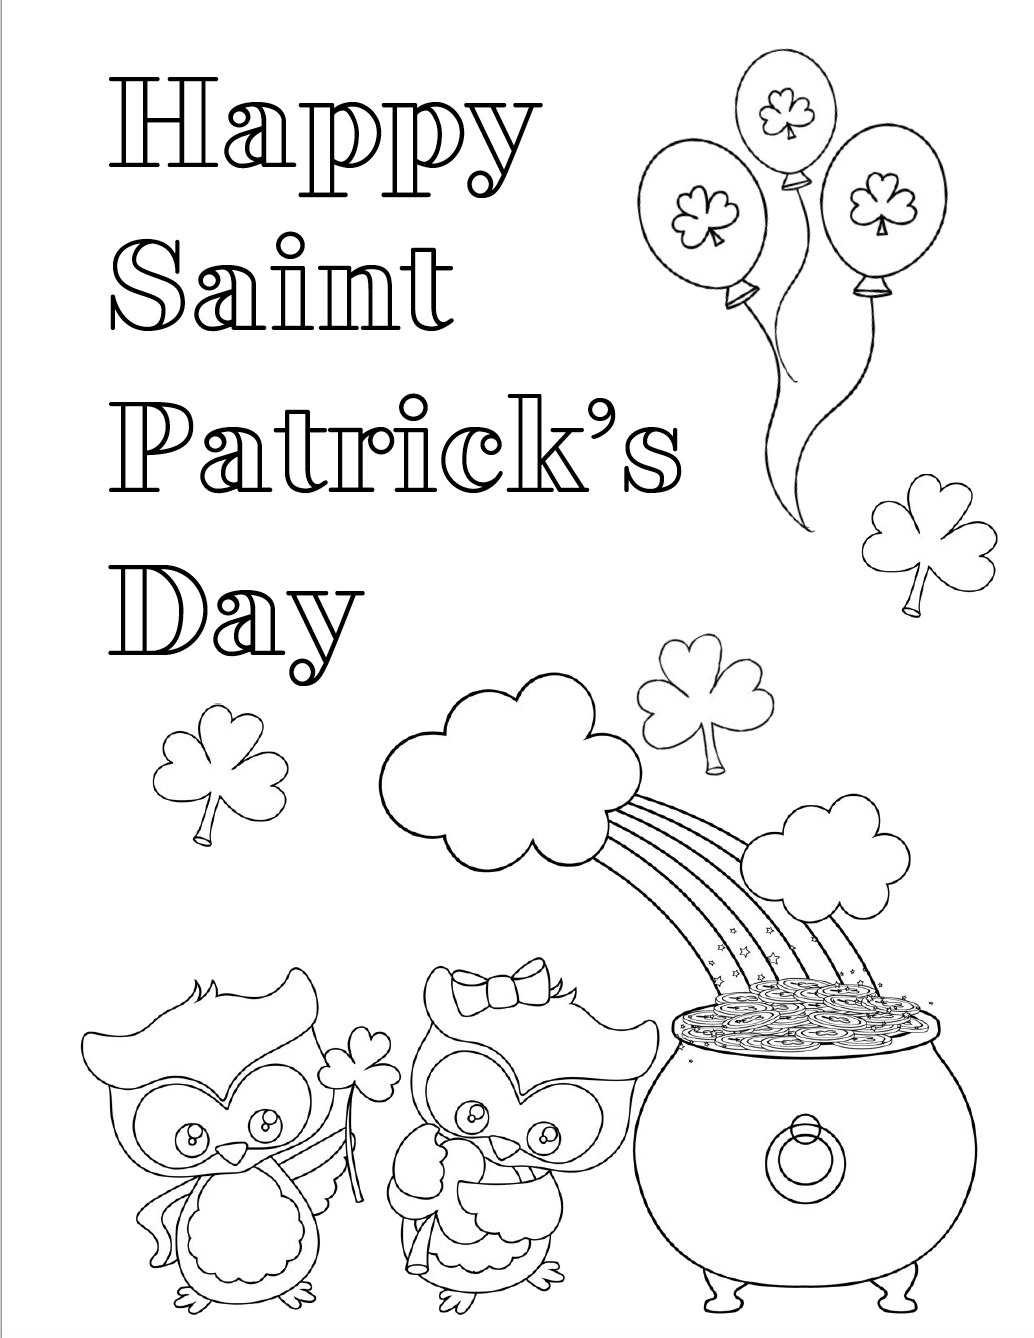 Free Printable St Patricks Day Coloring Pages 4 Designs